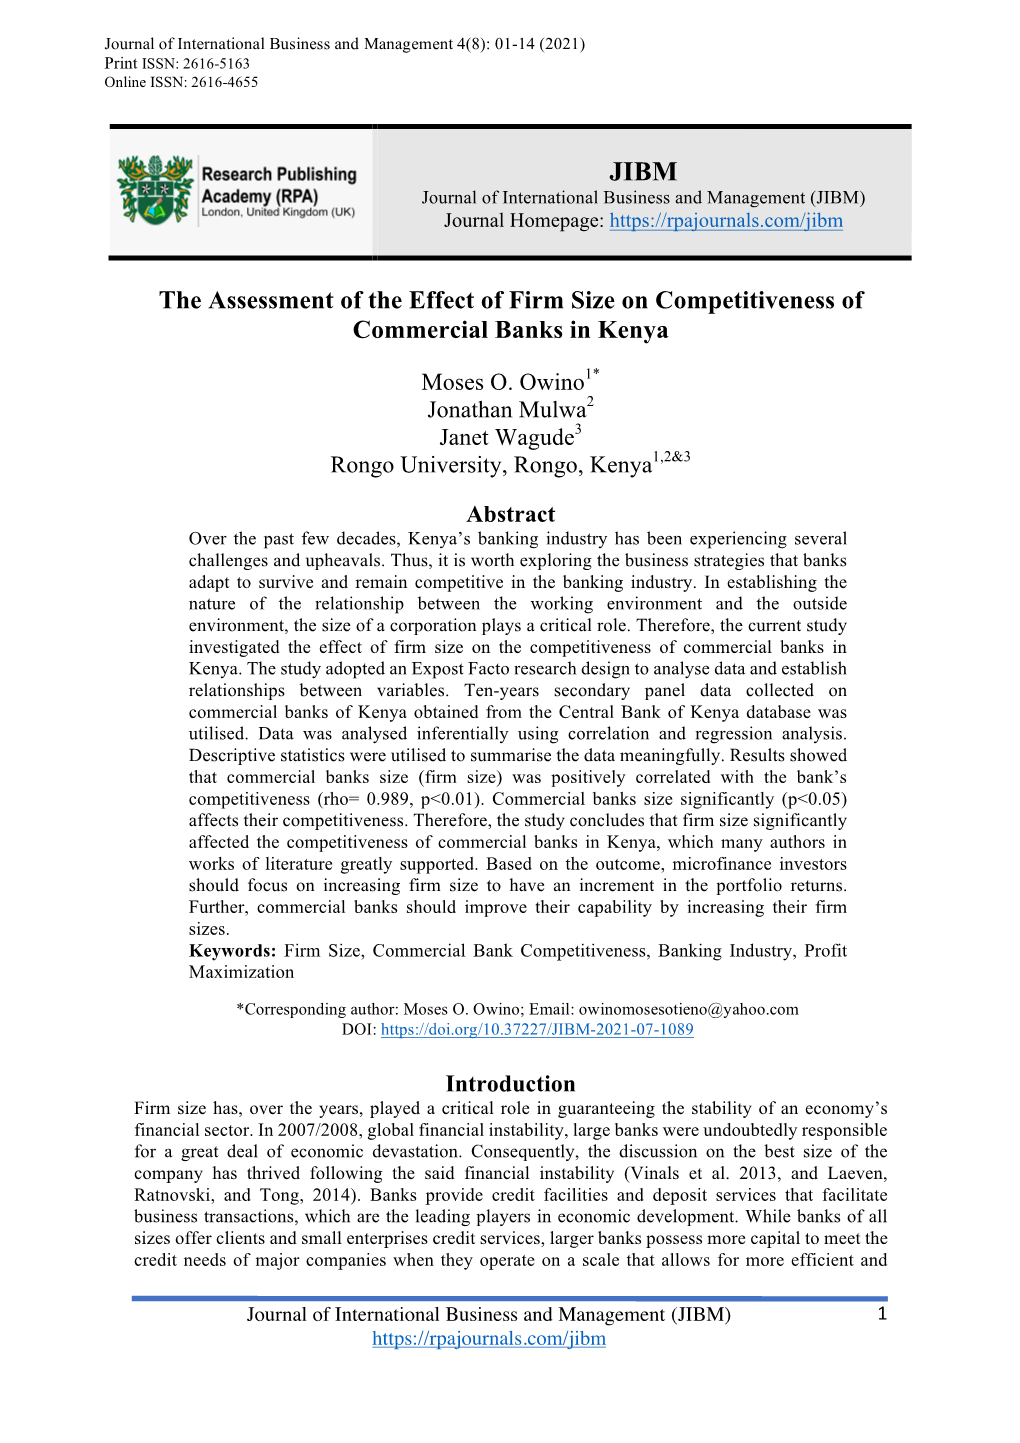 January 2021 the Assessment of the Effect of Firm Size On